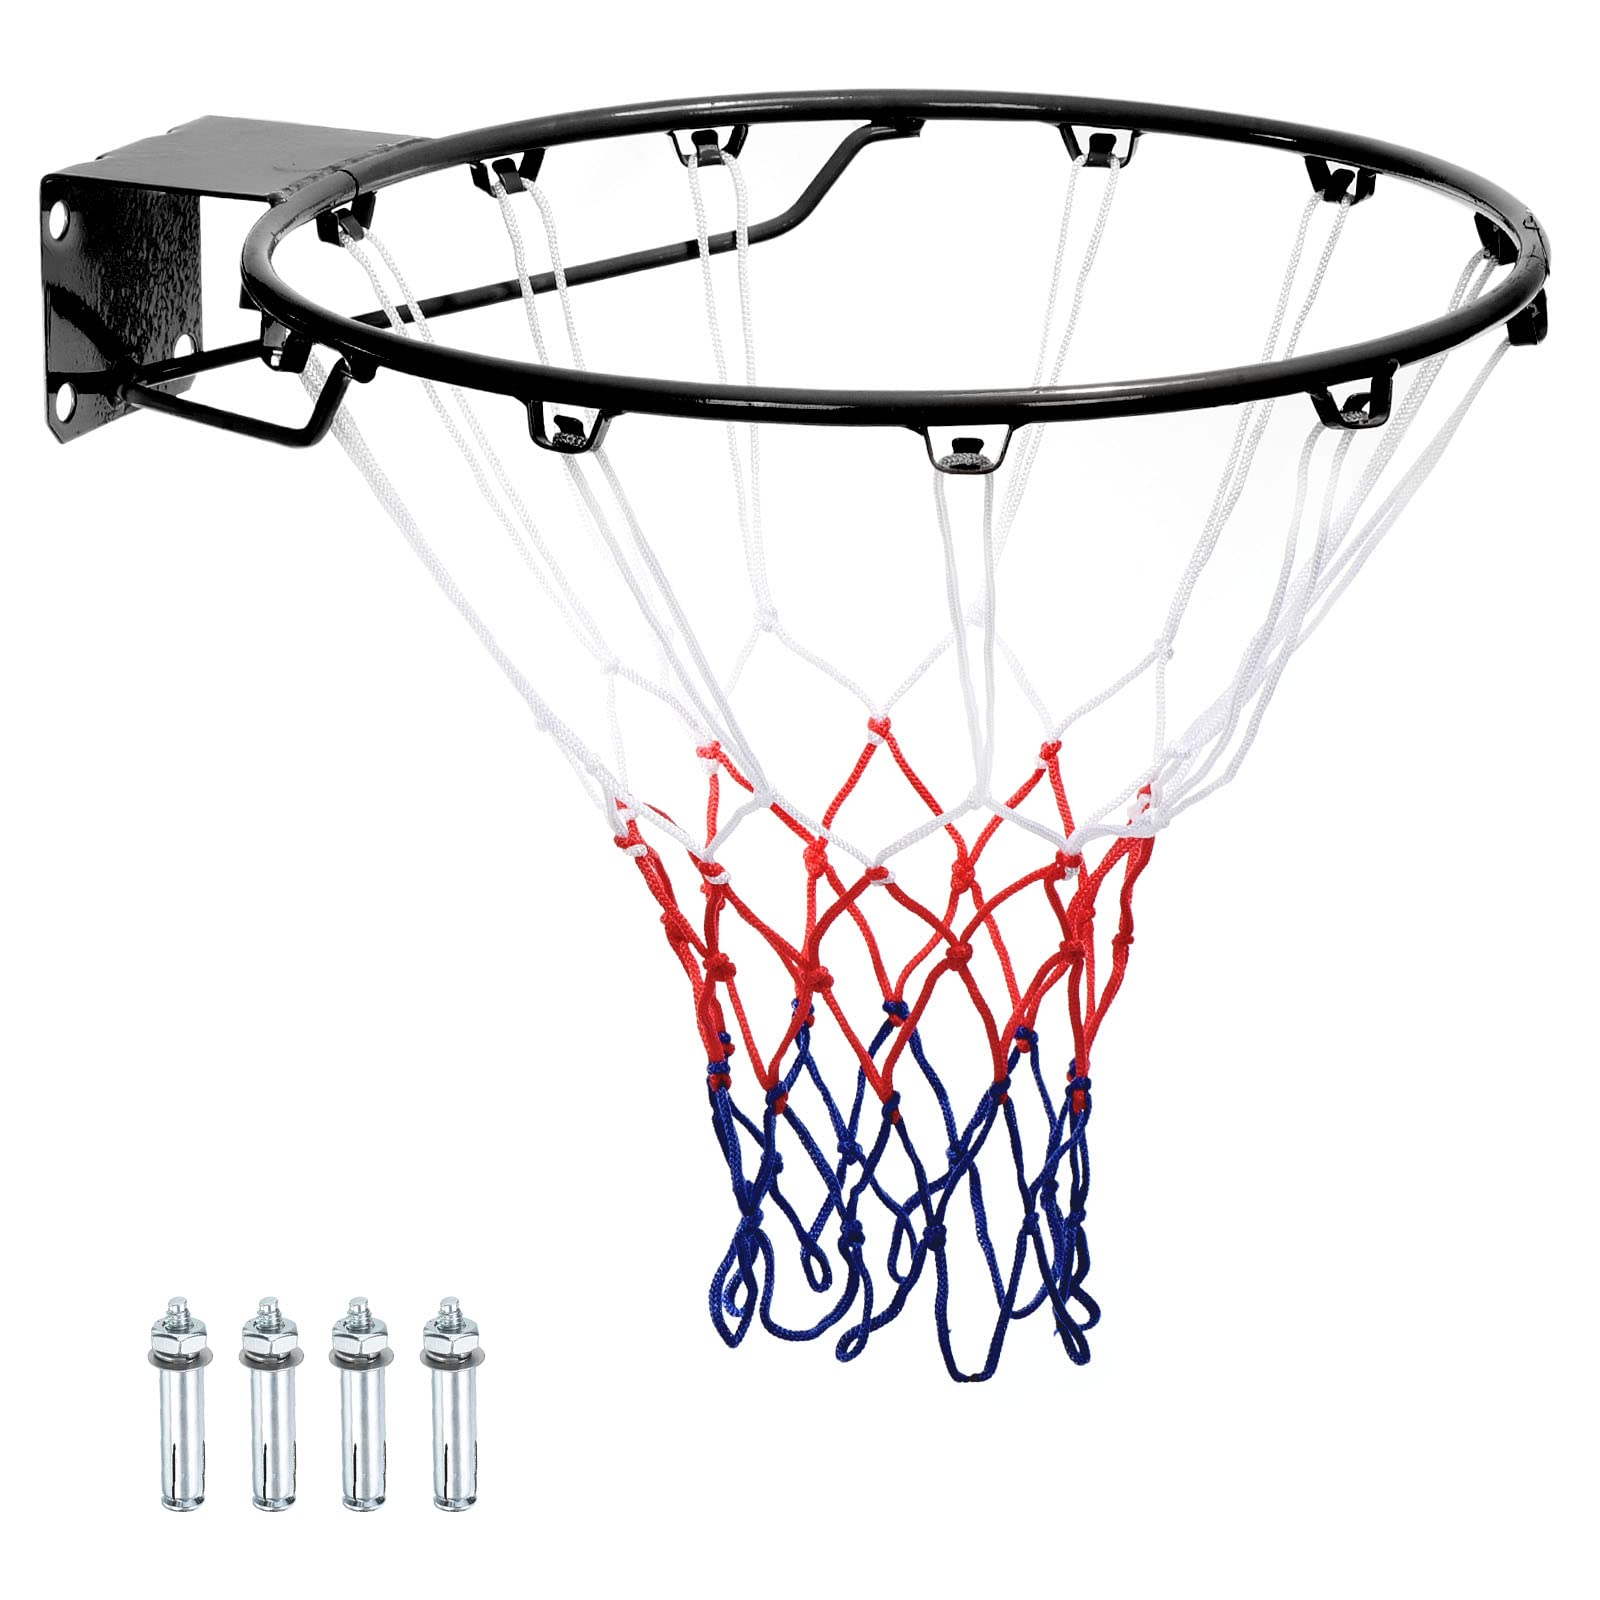 18 Full Size Basketball Hoop Ring Net Wall Mounted Outdoor